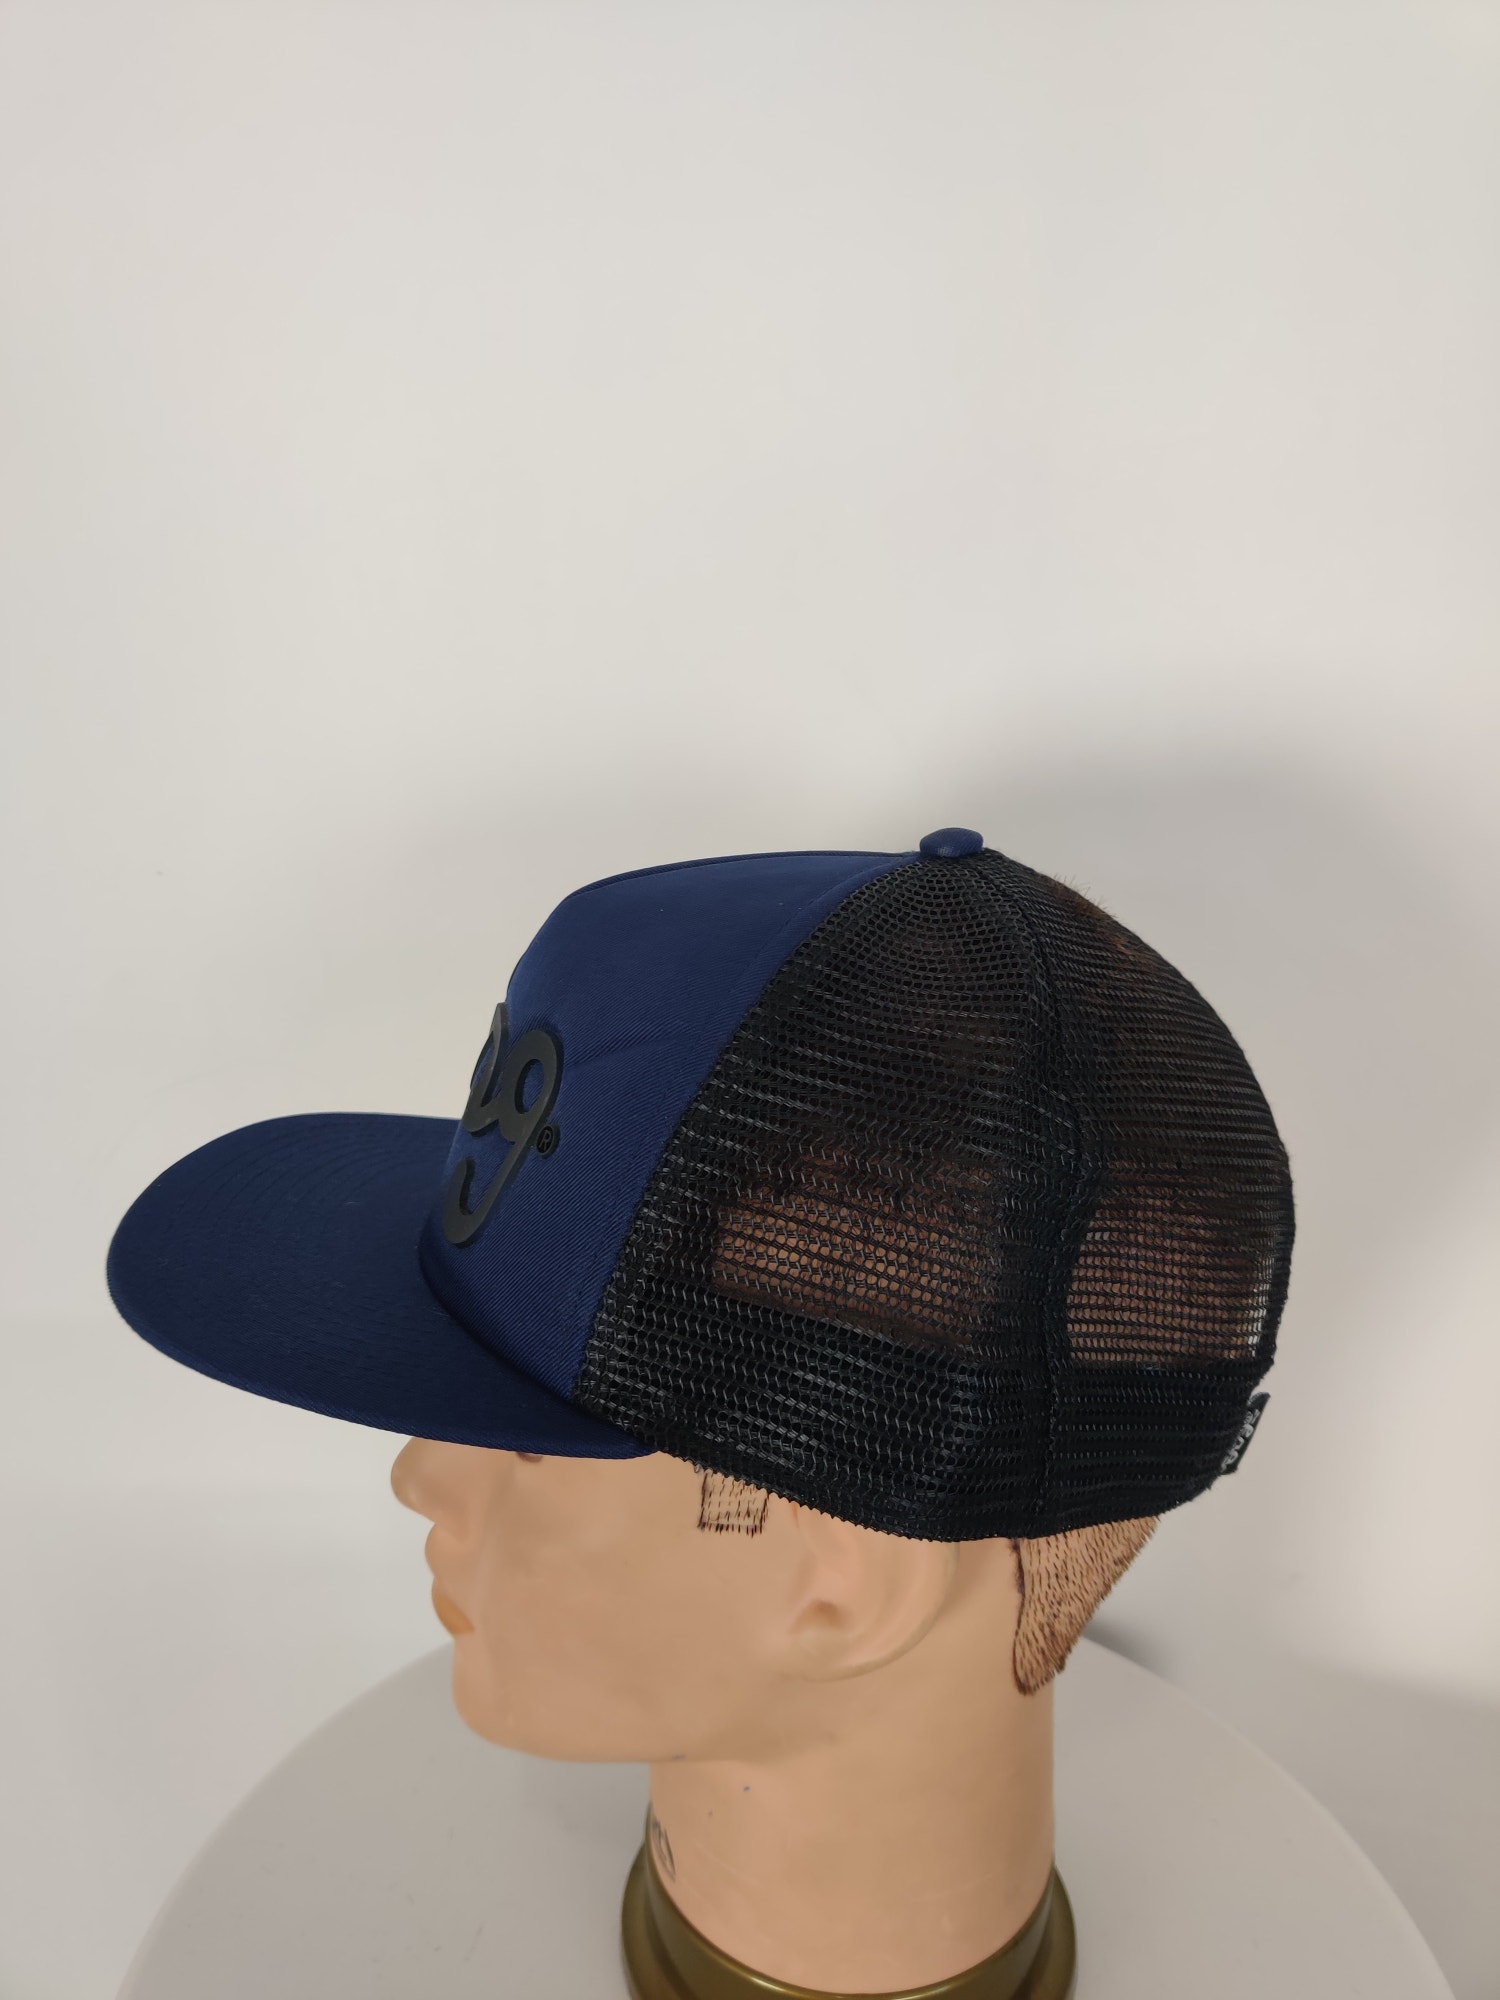 (V) ORIGINAL LRG Unisex hat hiking casual mesh back navy One size  - Picture 3 of 11